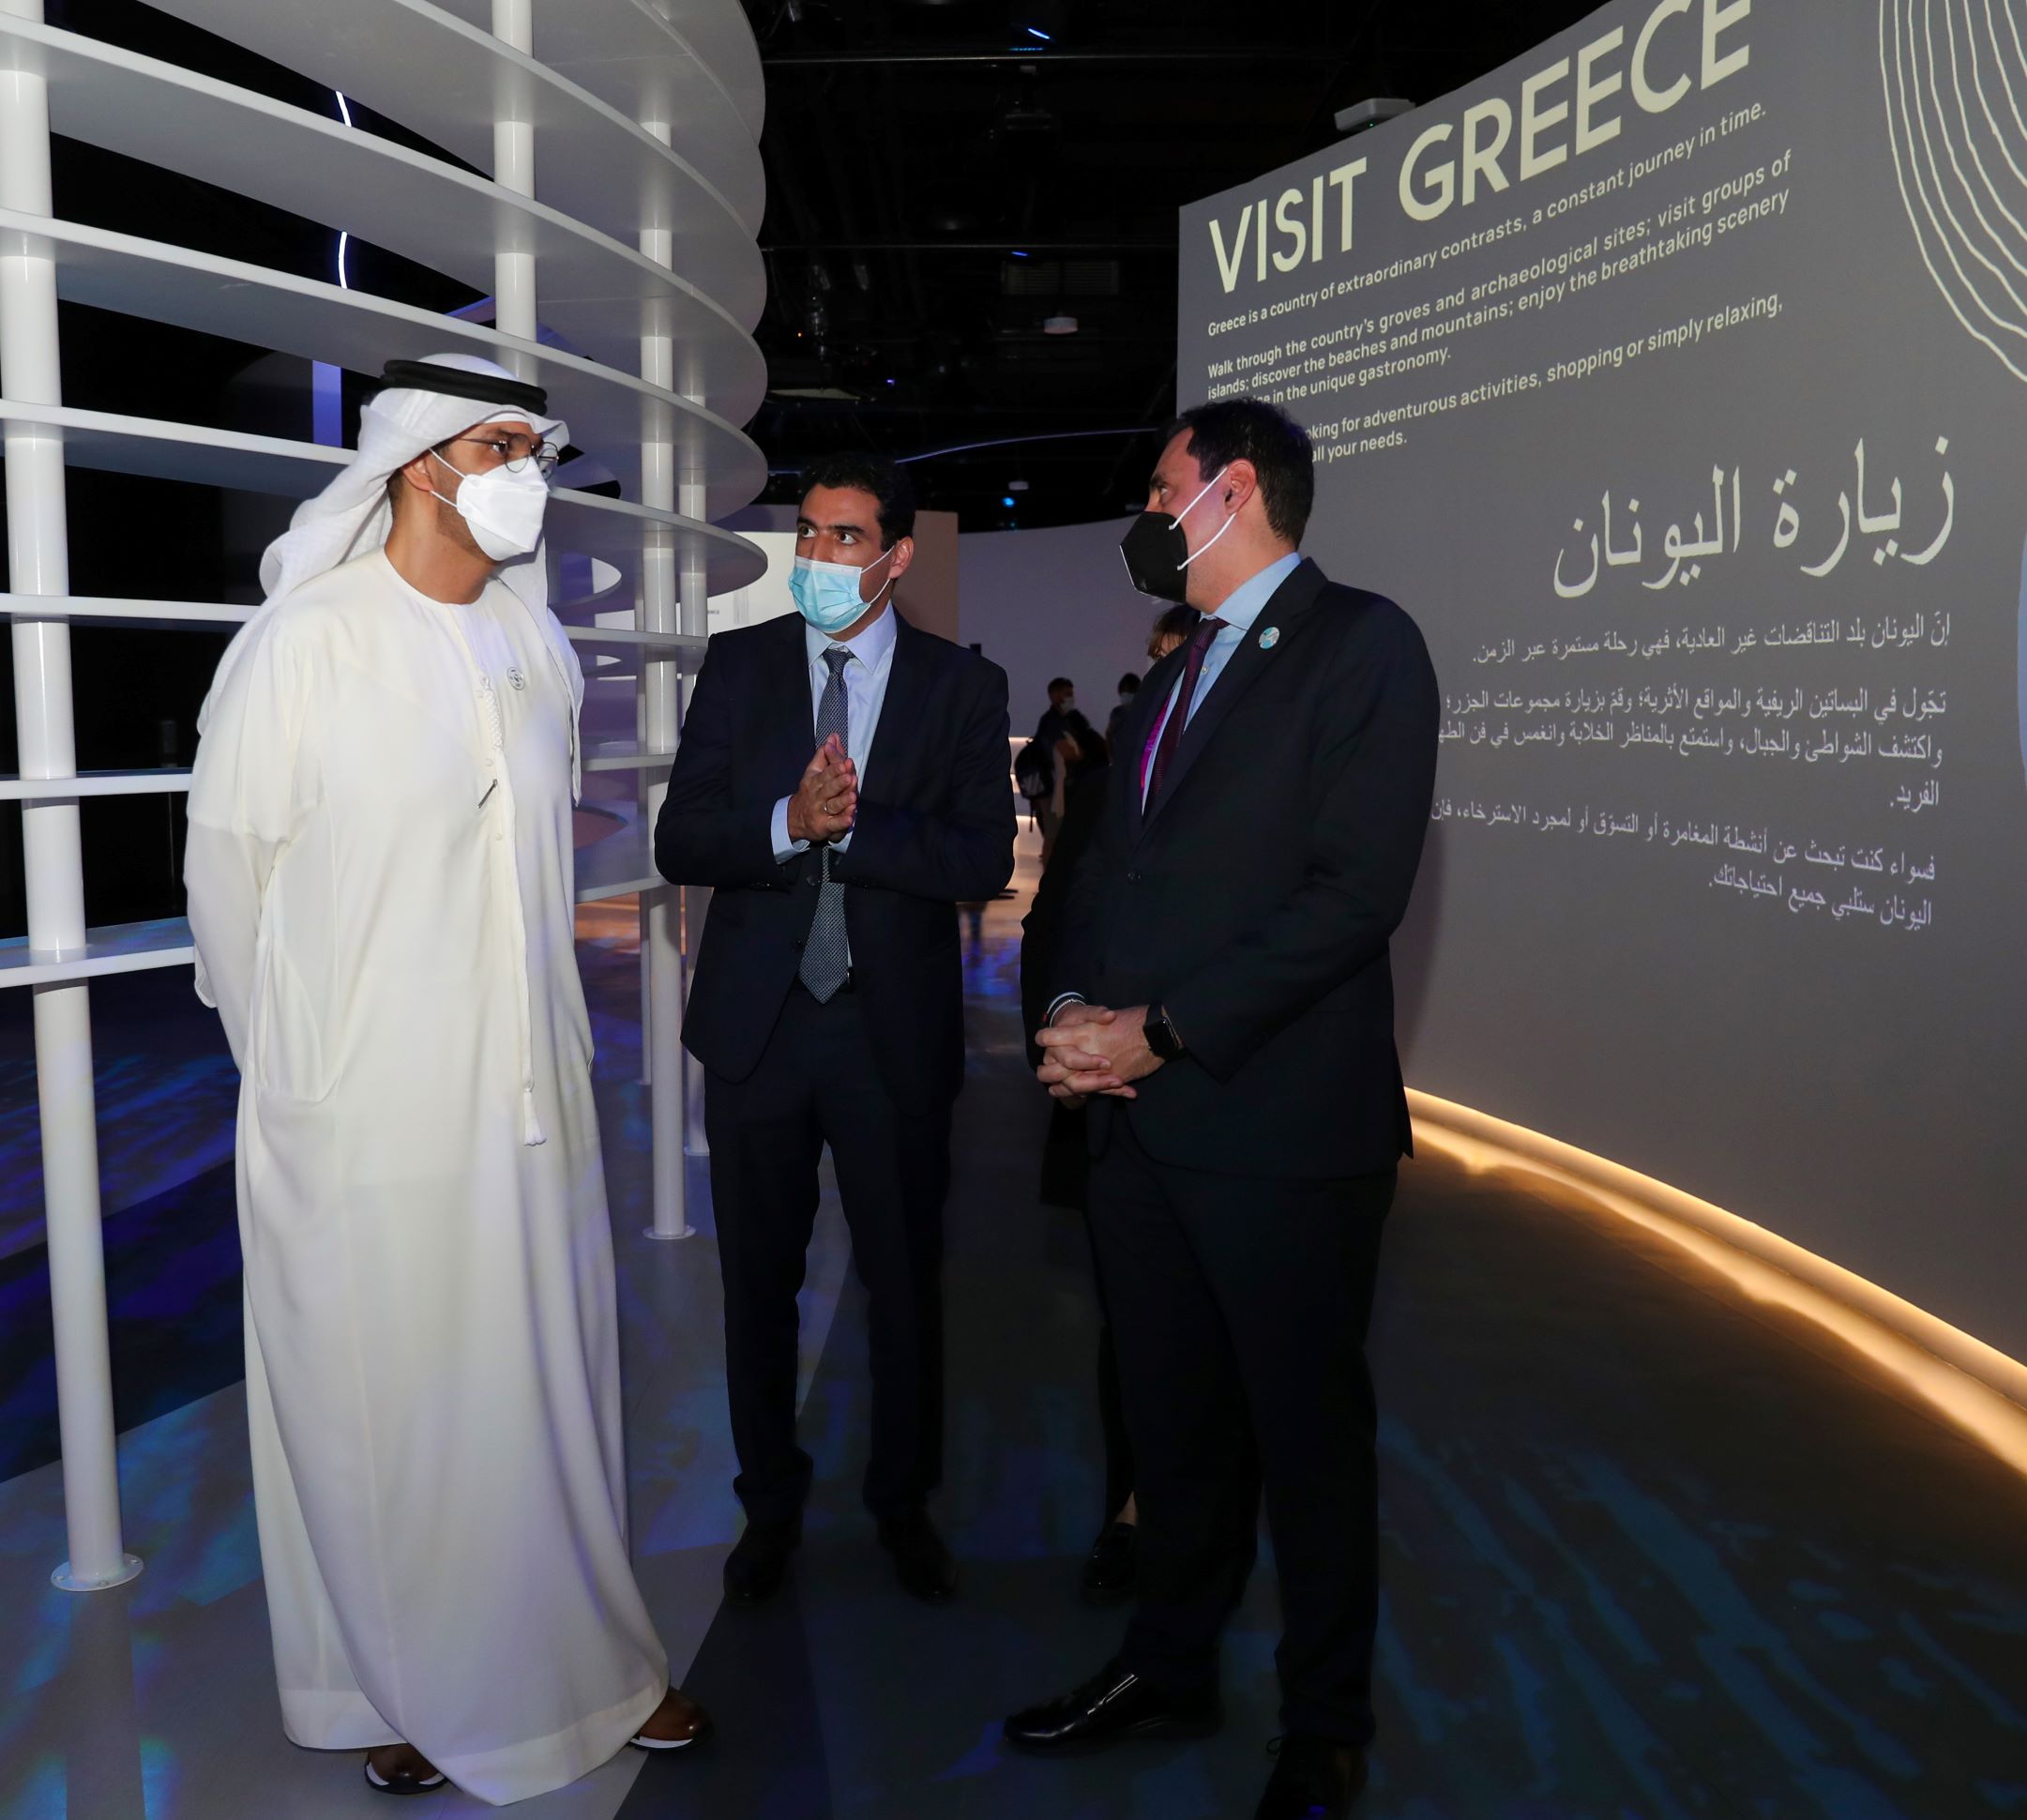 Minister of Industry and Advanced Technology Visits Greece Pavilion at Expo 2020 Dubai, Explores Innovations and Discusses Economic Opportunities